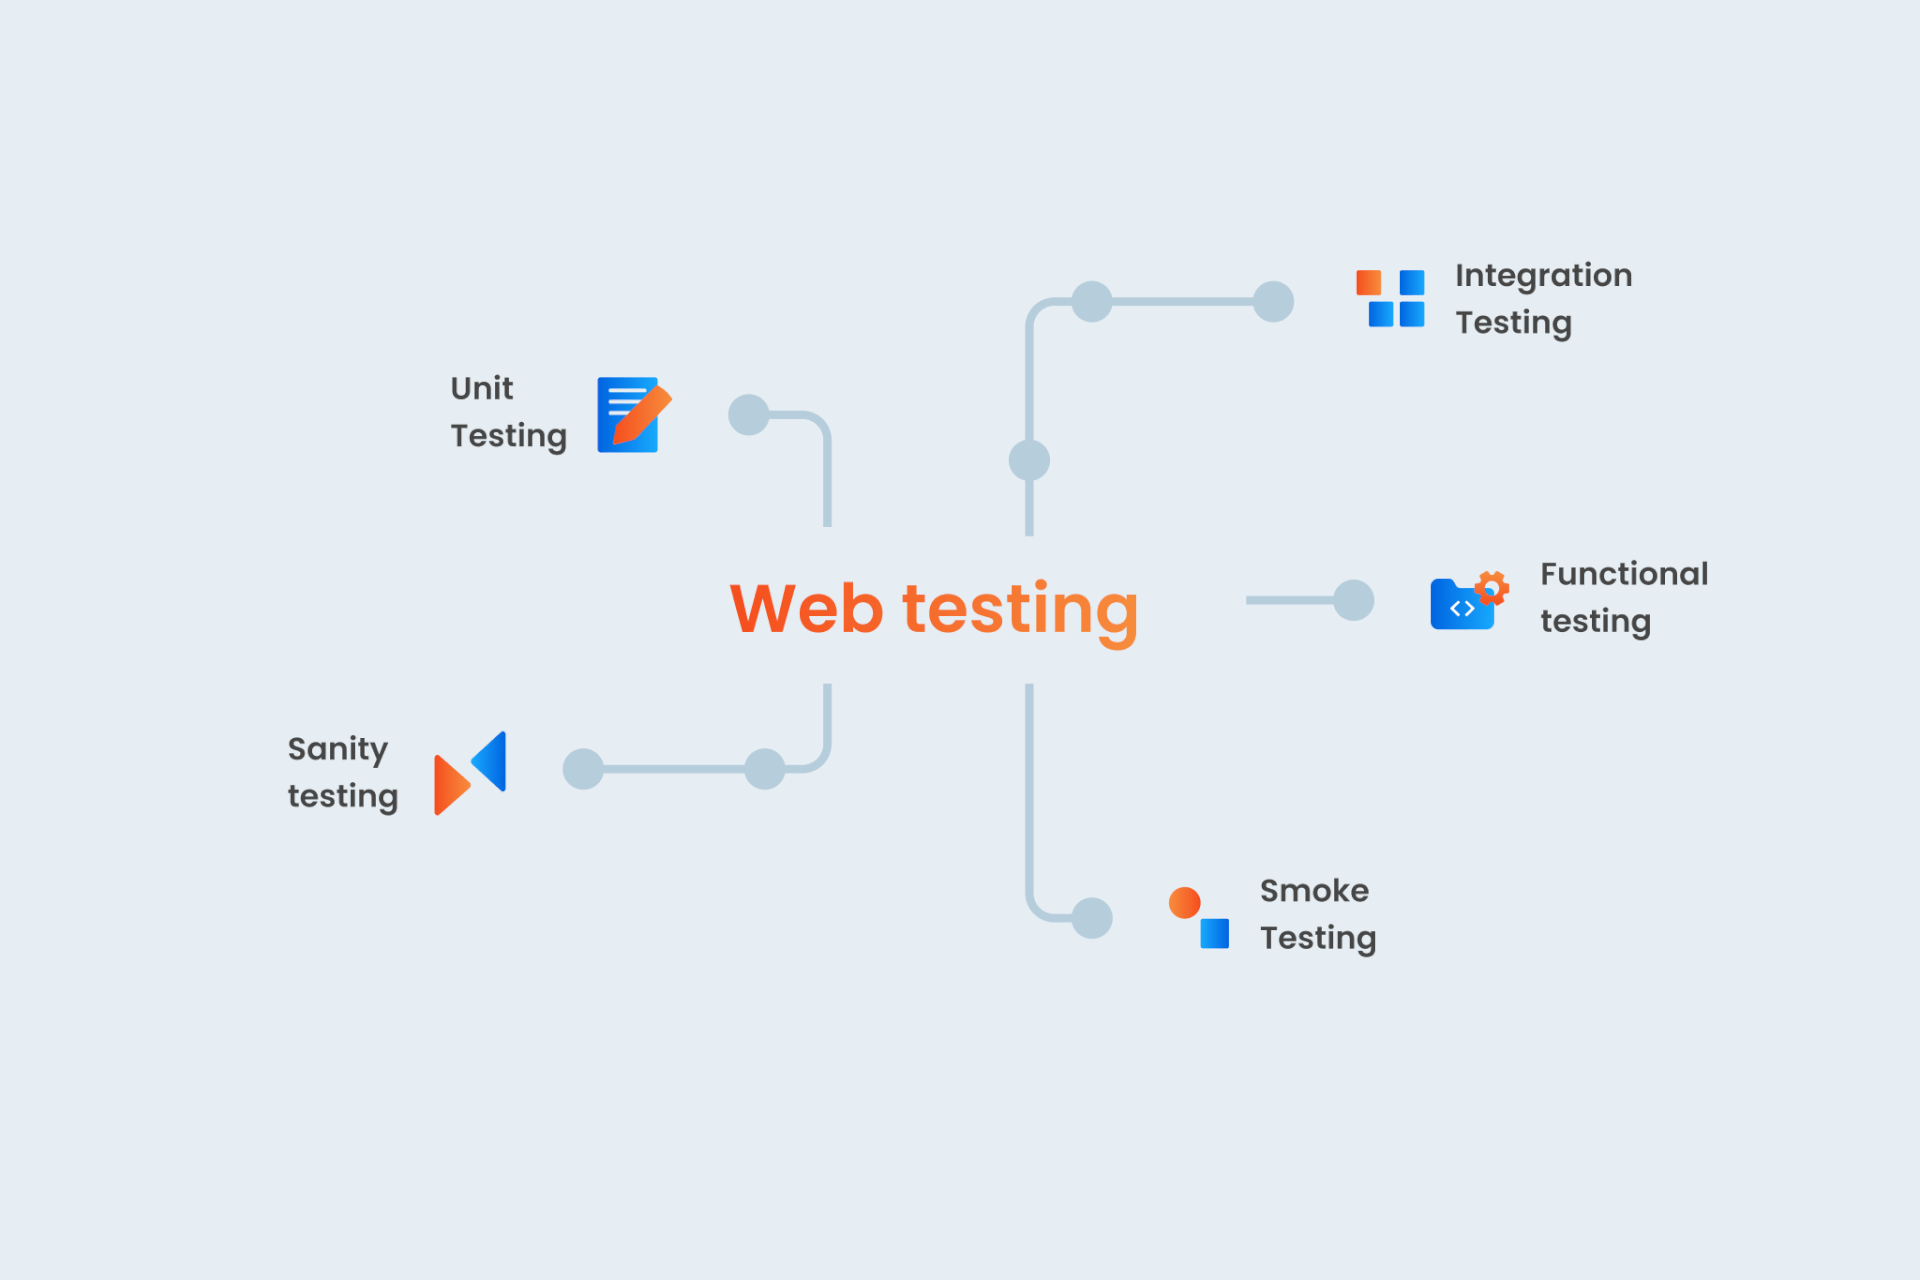 The image shows the most common types of web testing: Unit, Integration, Functional, Smoke, and Sanity Testing.